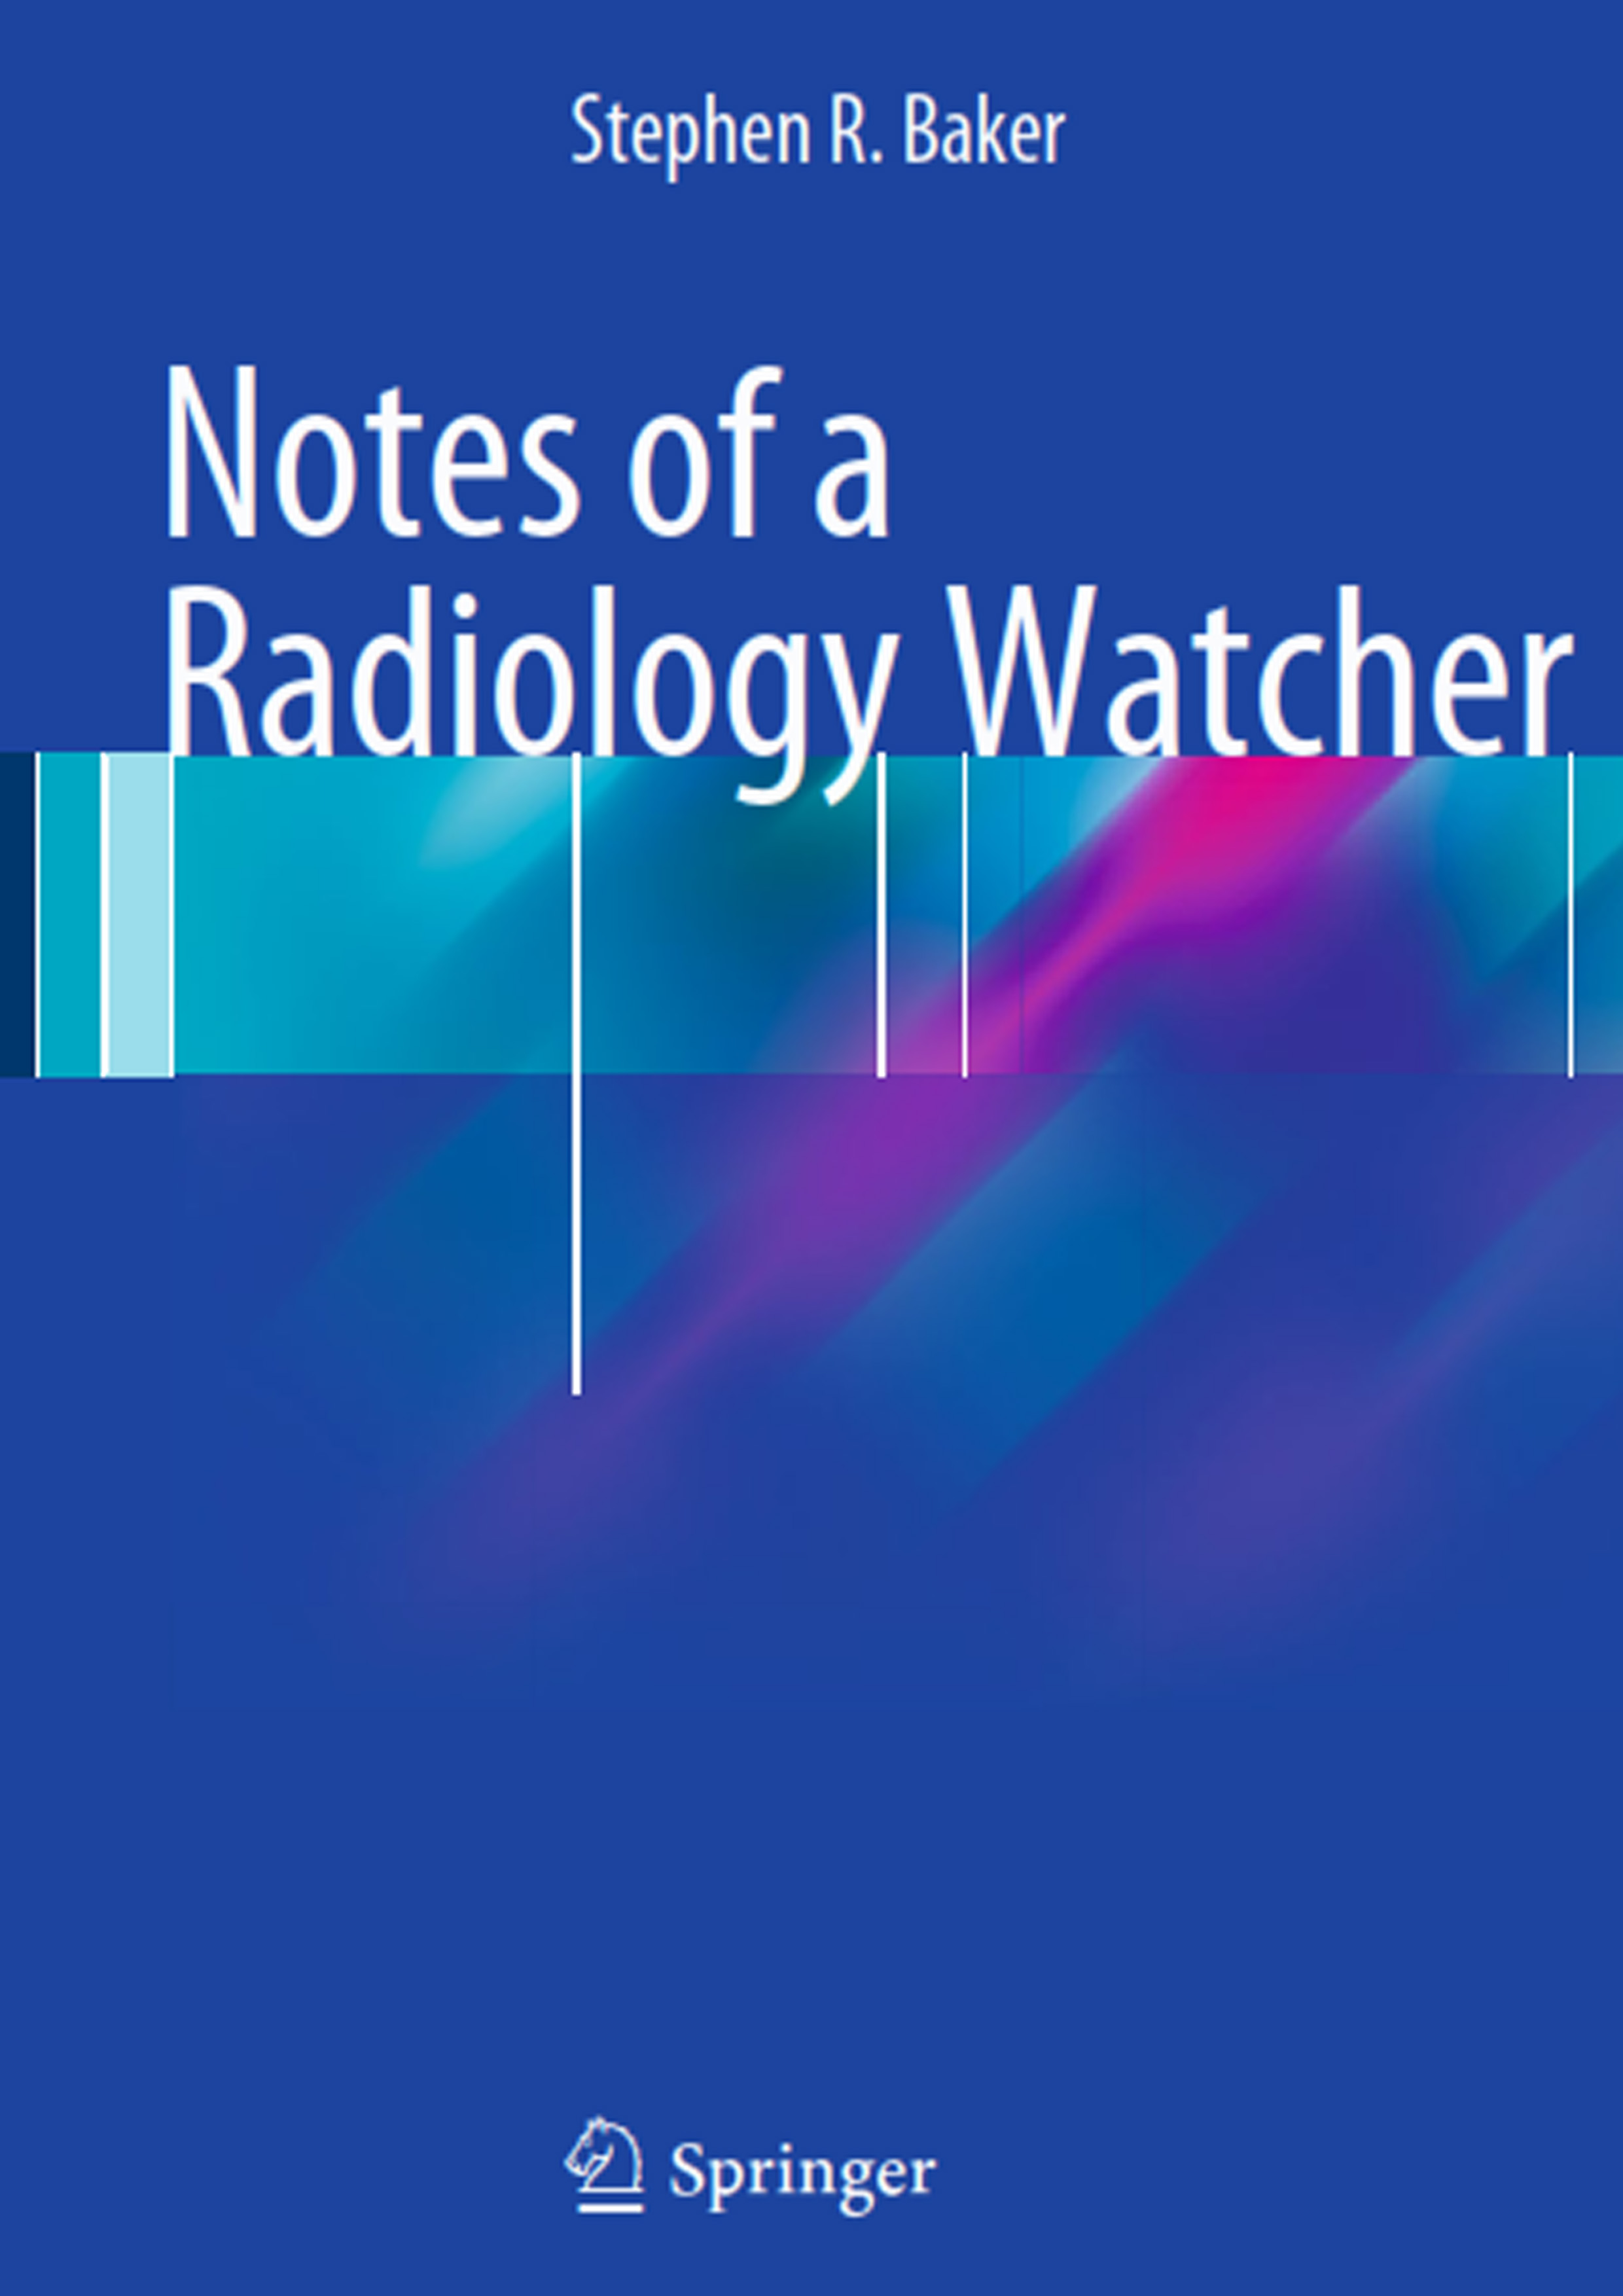 ﻿Baker - Notes of a Radiology Watcher